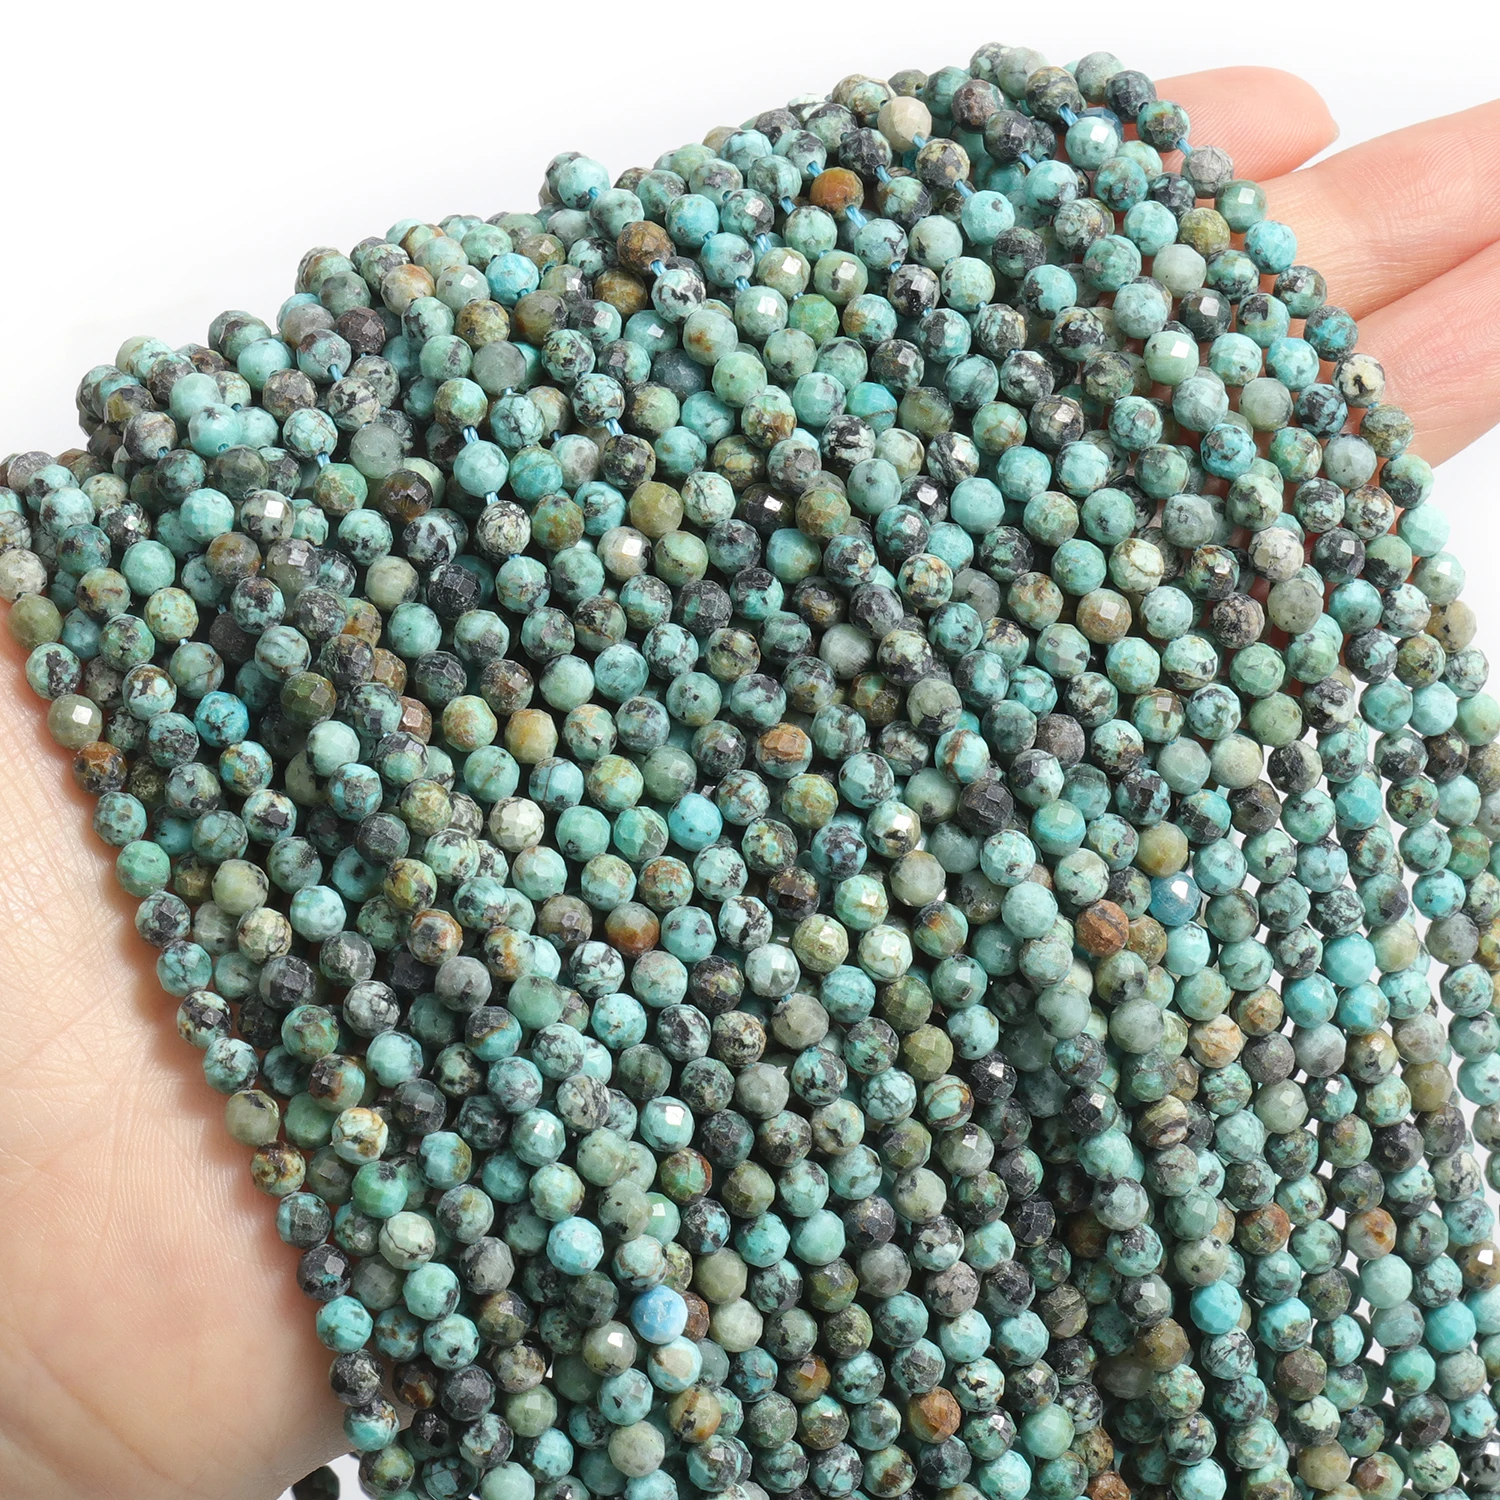 2/3/4mm Faceted African Turquoise Natural Stone Beads Round Tiny Beads For Jewelry Making DIY Necklace Bracelet Accessories 15''